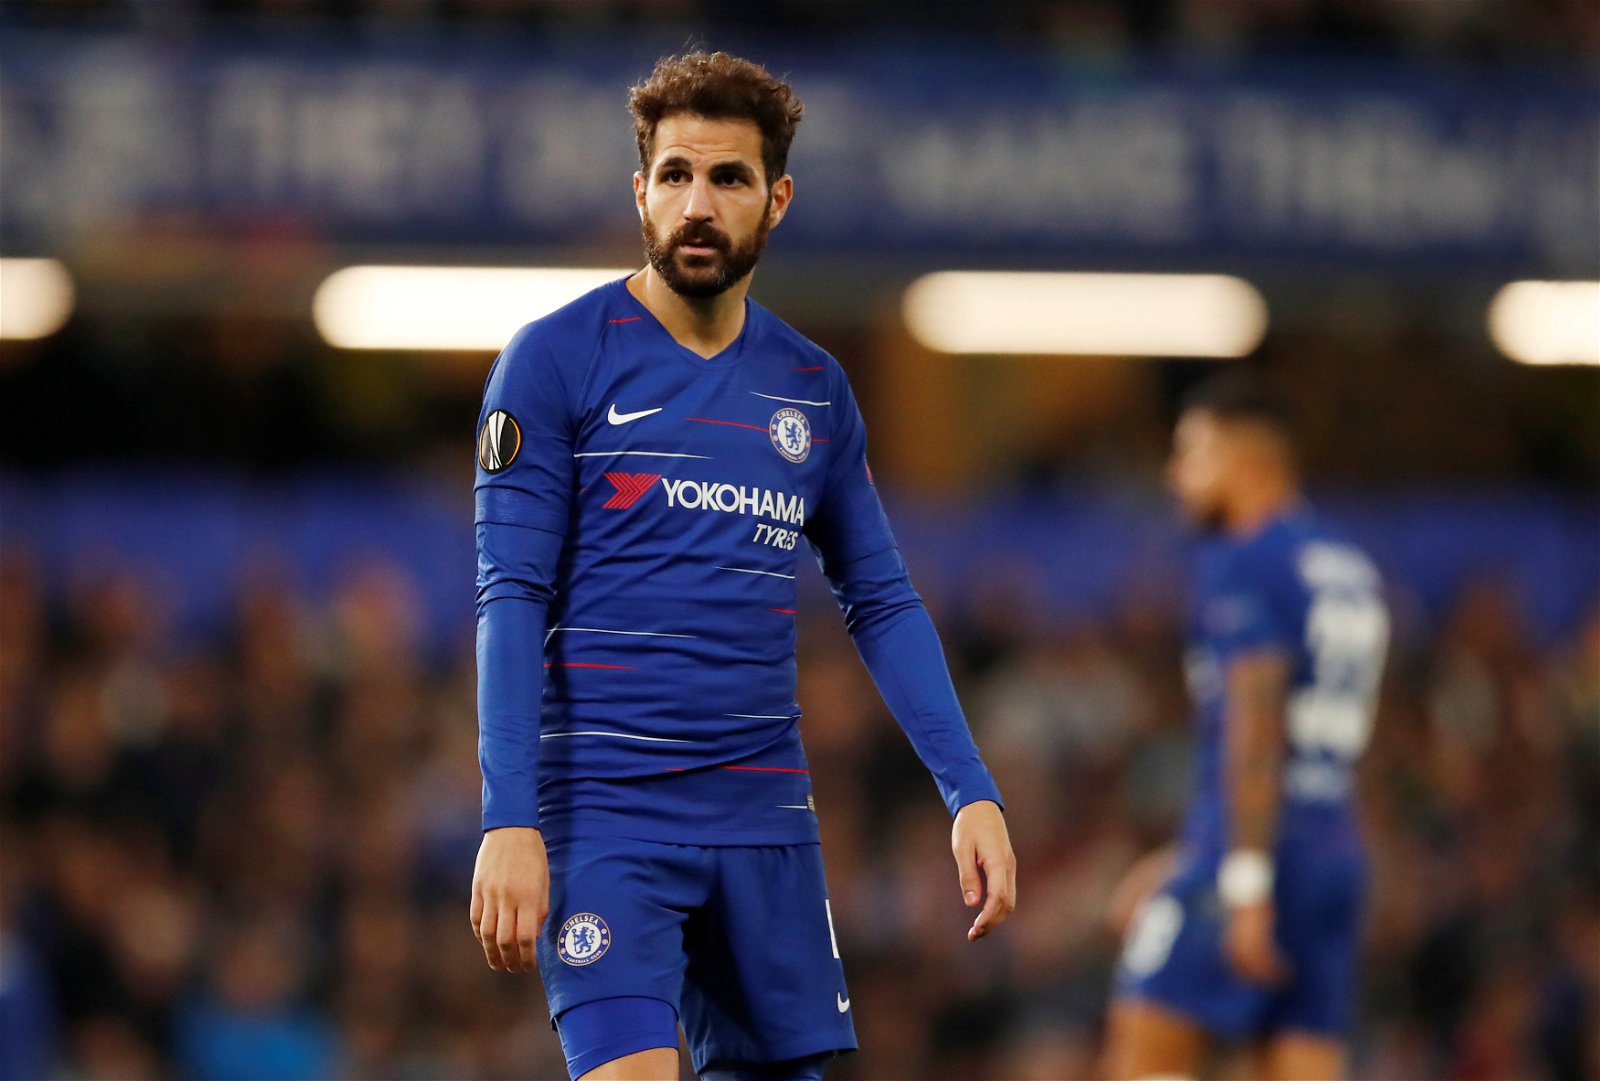 Cesc Fabregas wants to sign new contract at Chelsea